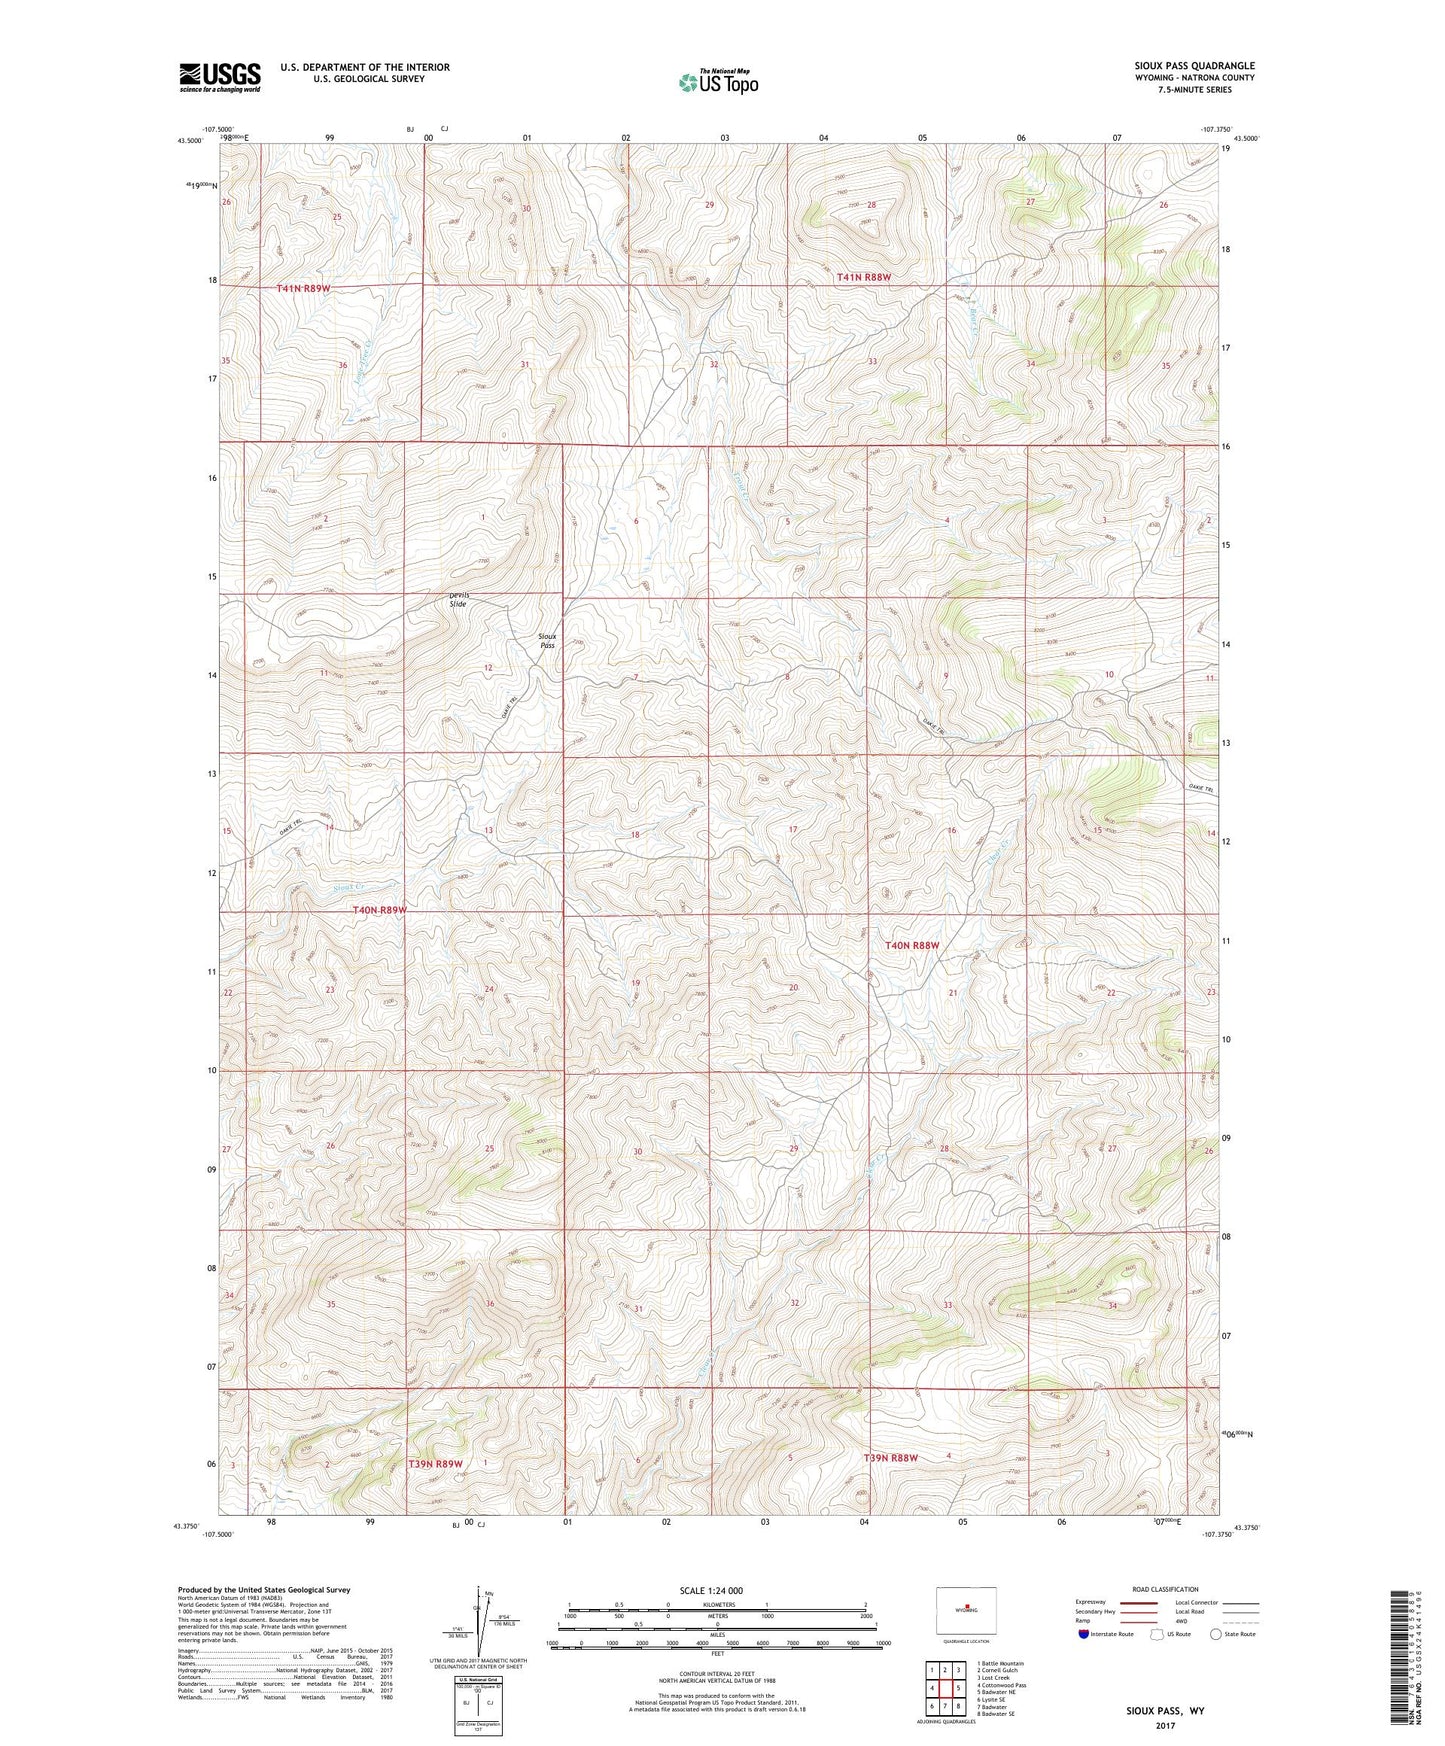 Sioux Pass Wyoming US Topo Map Image